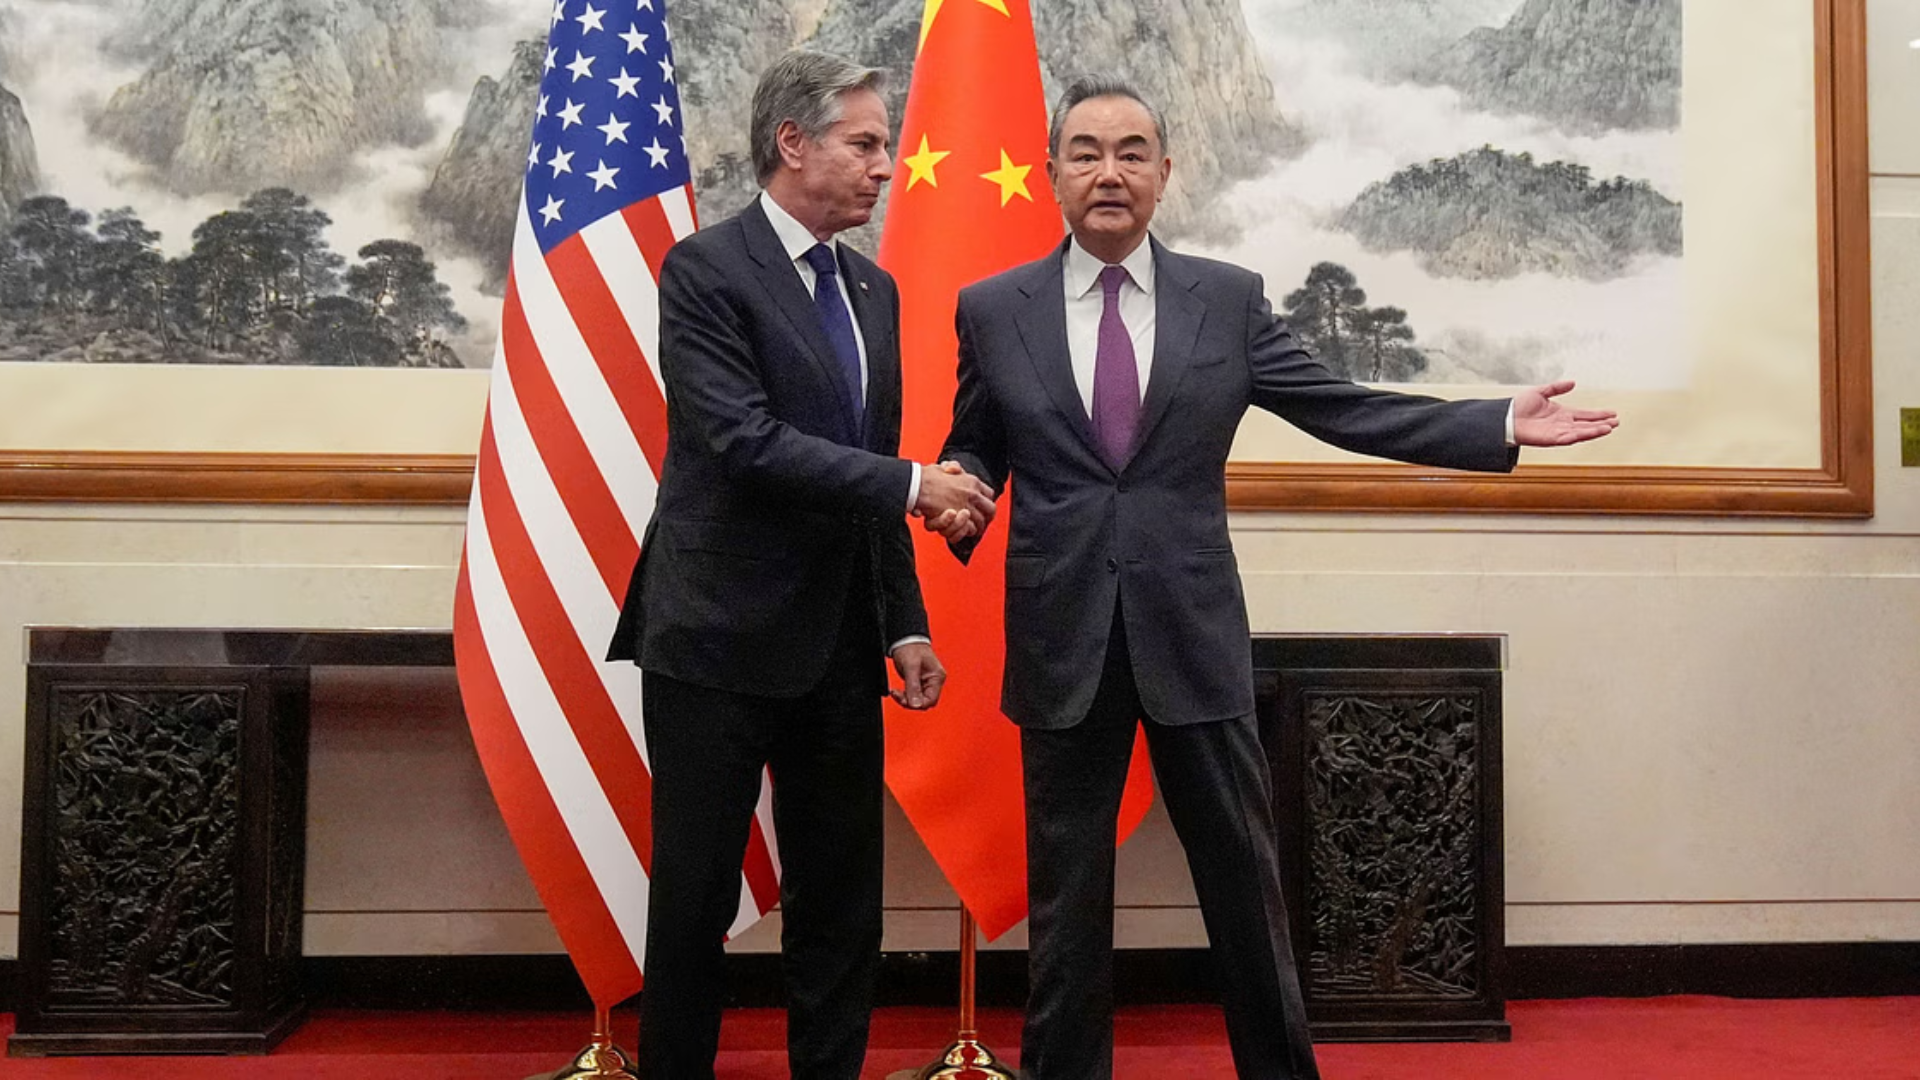 Negative factor building in China-US relations Know why